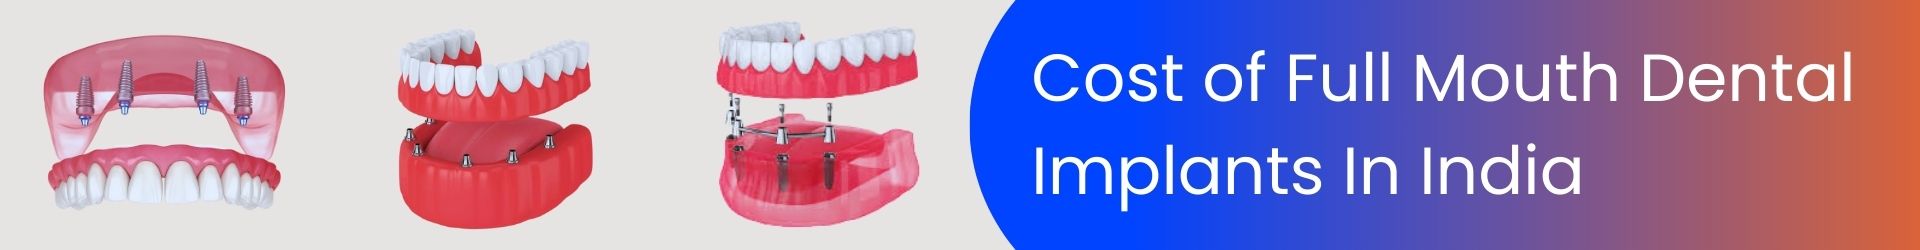 Price-of-full-mouth-dental-implants-in-India